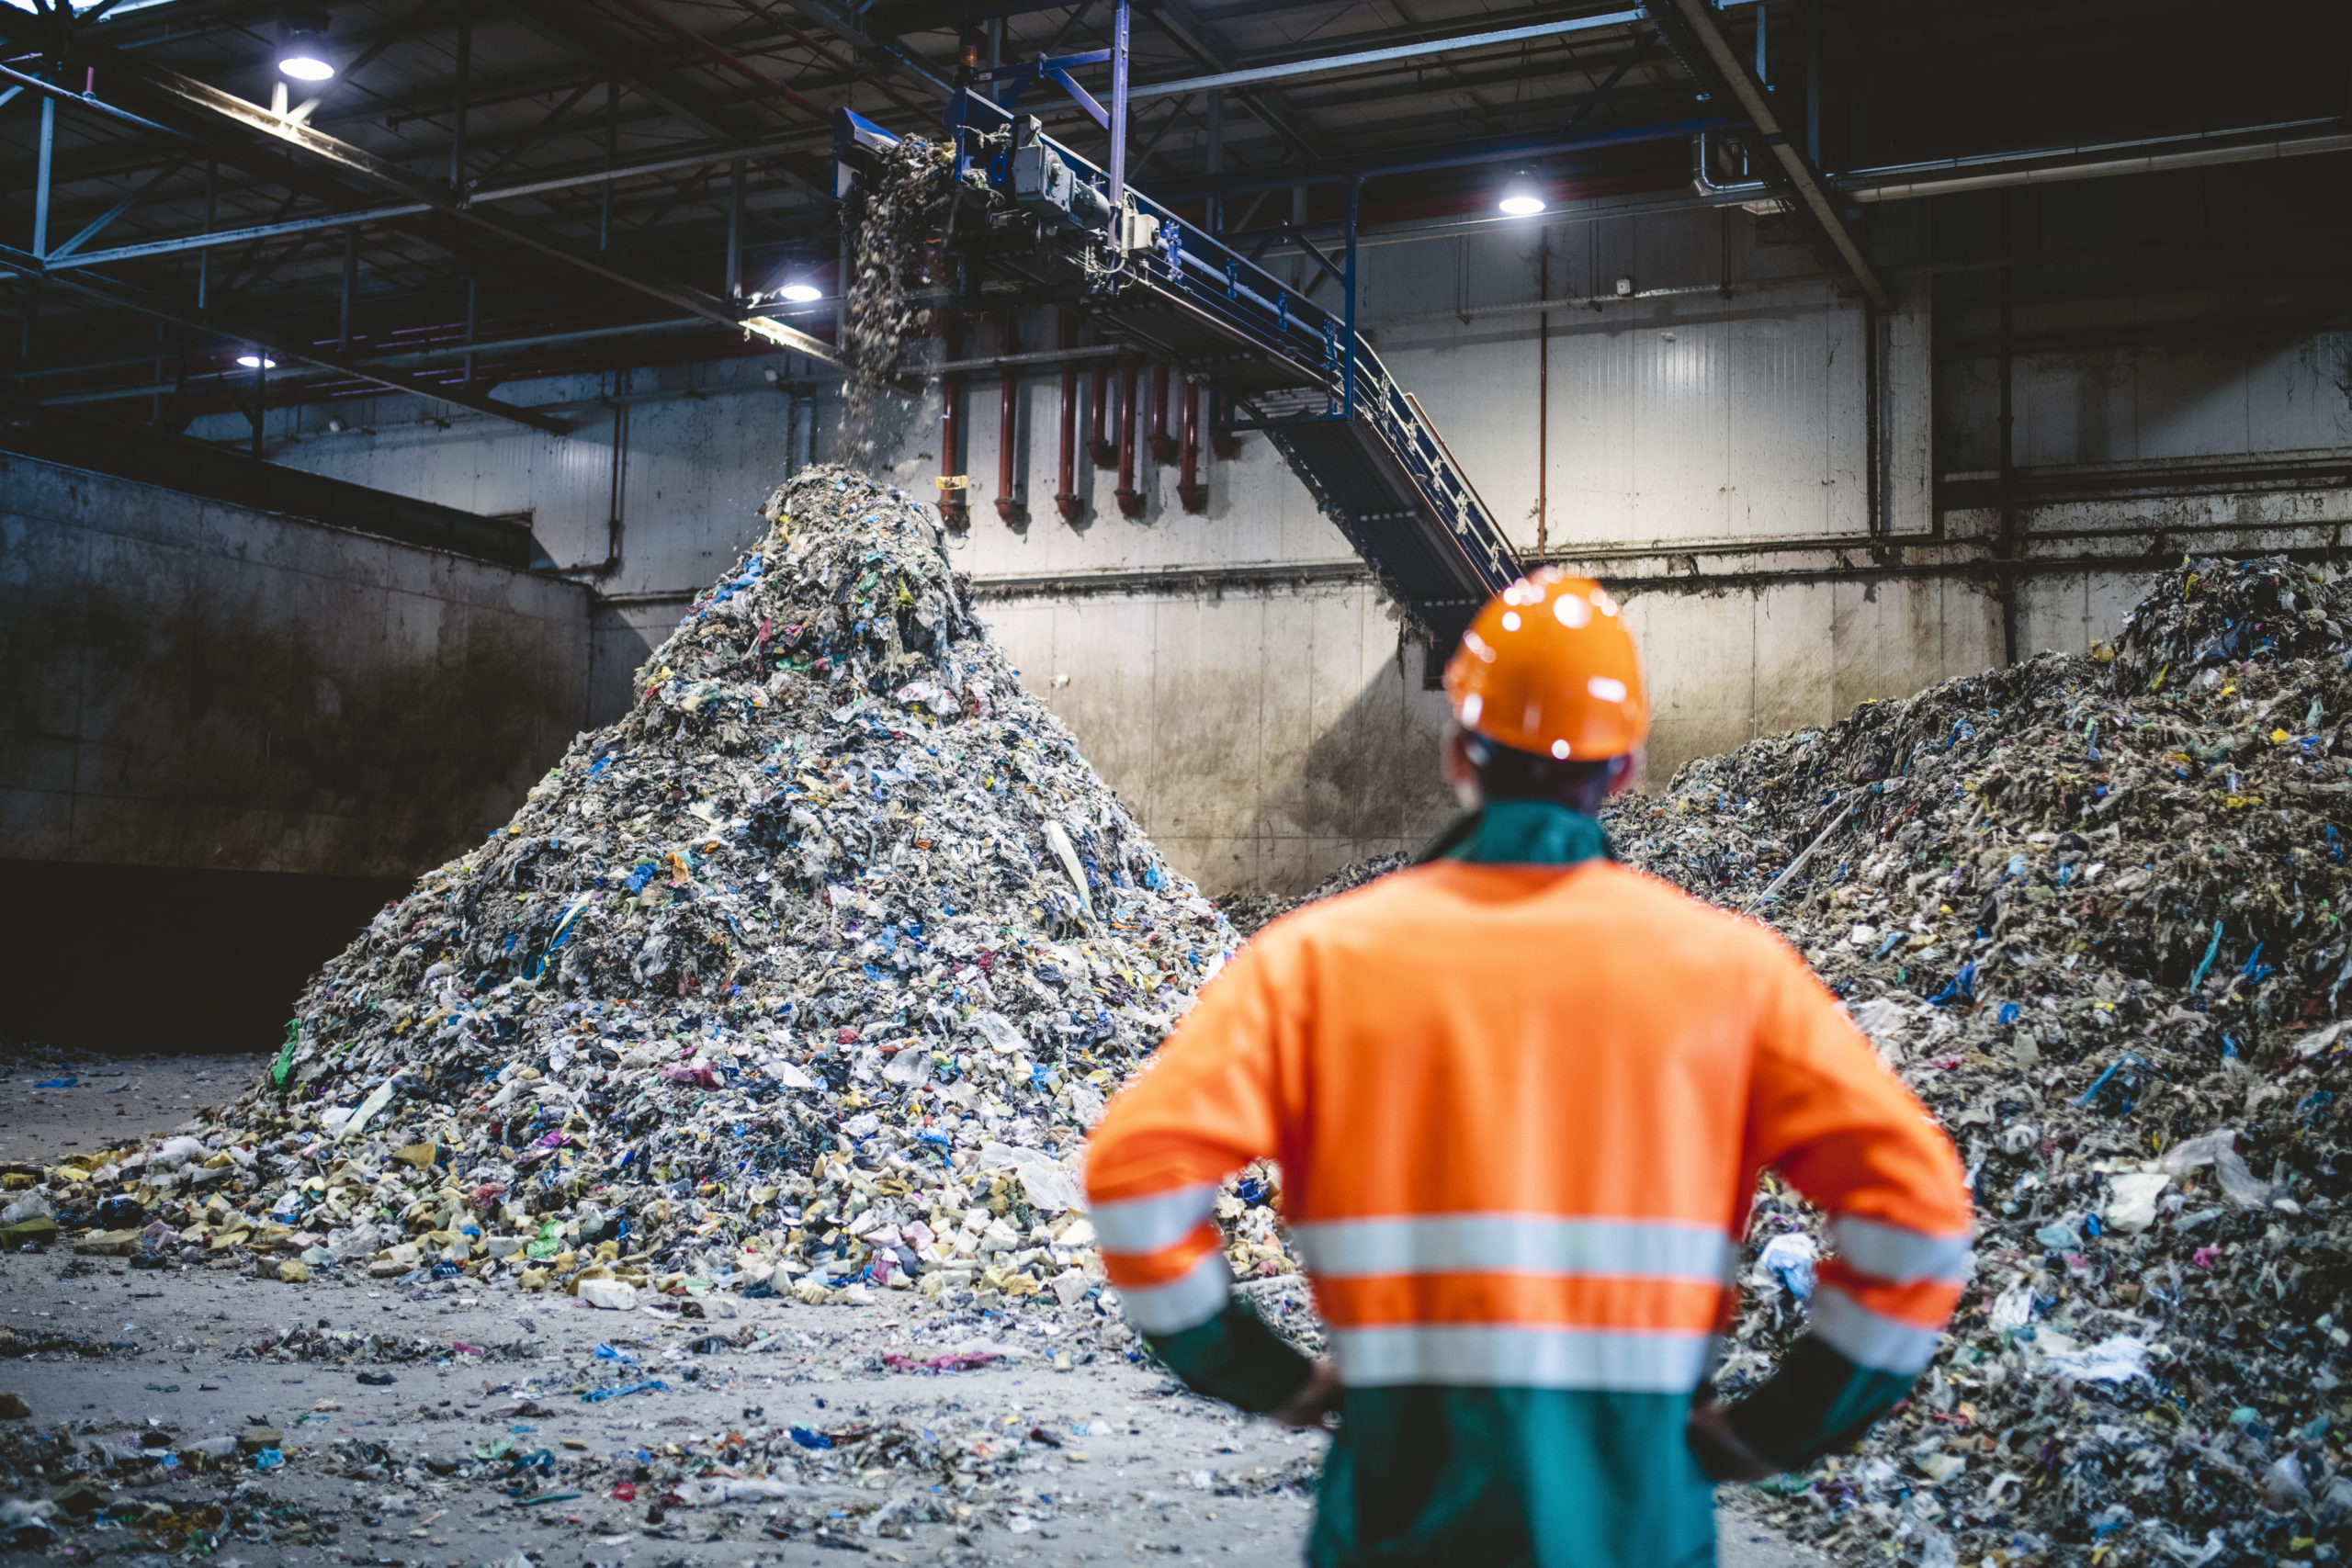 Featured Image. Worker Observing Processing of Waste at Recycling Facility